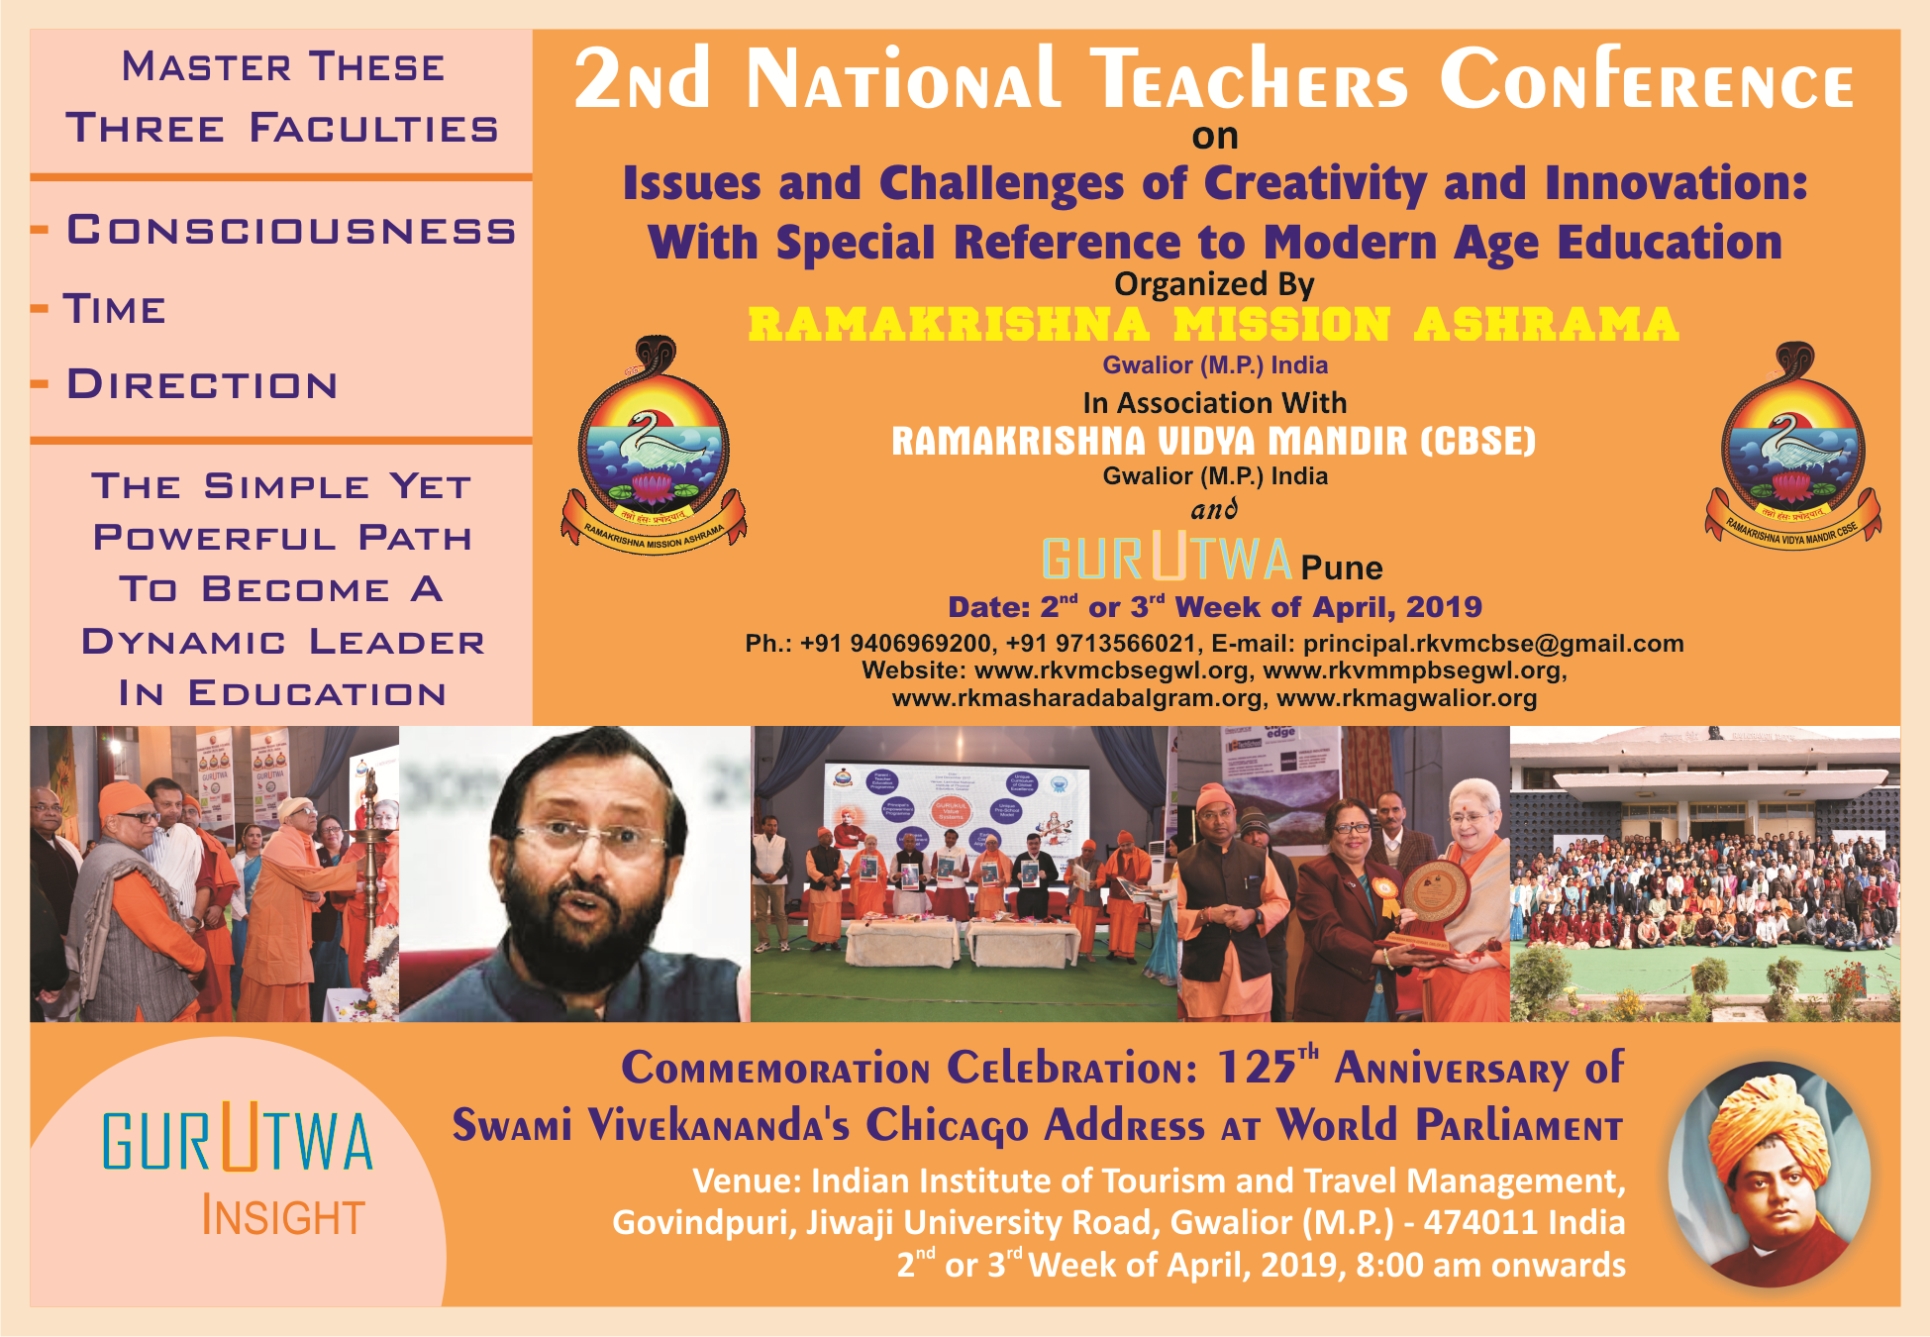 2nd National Teachers Conference 2018-19